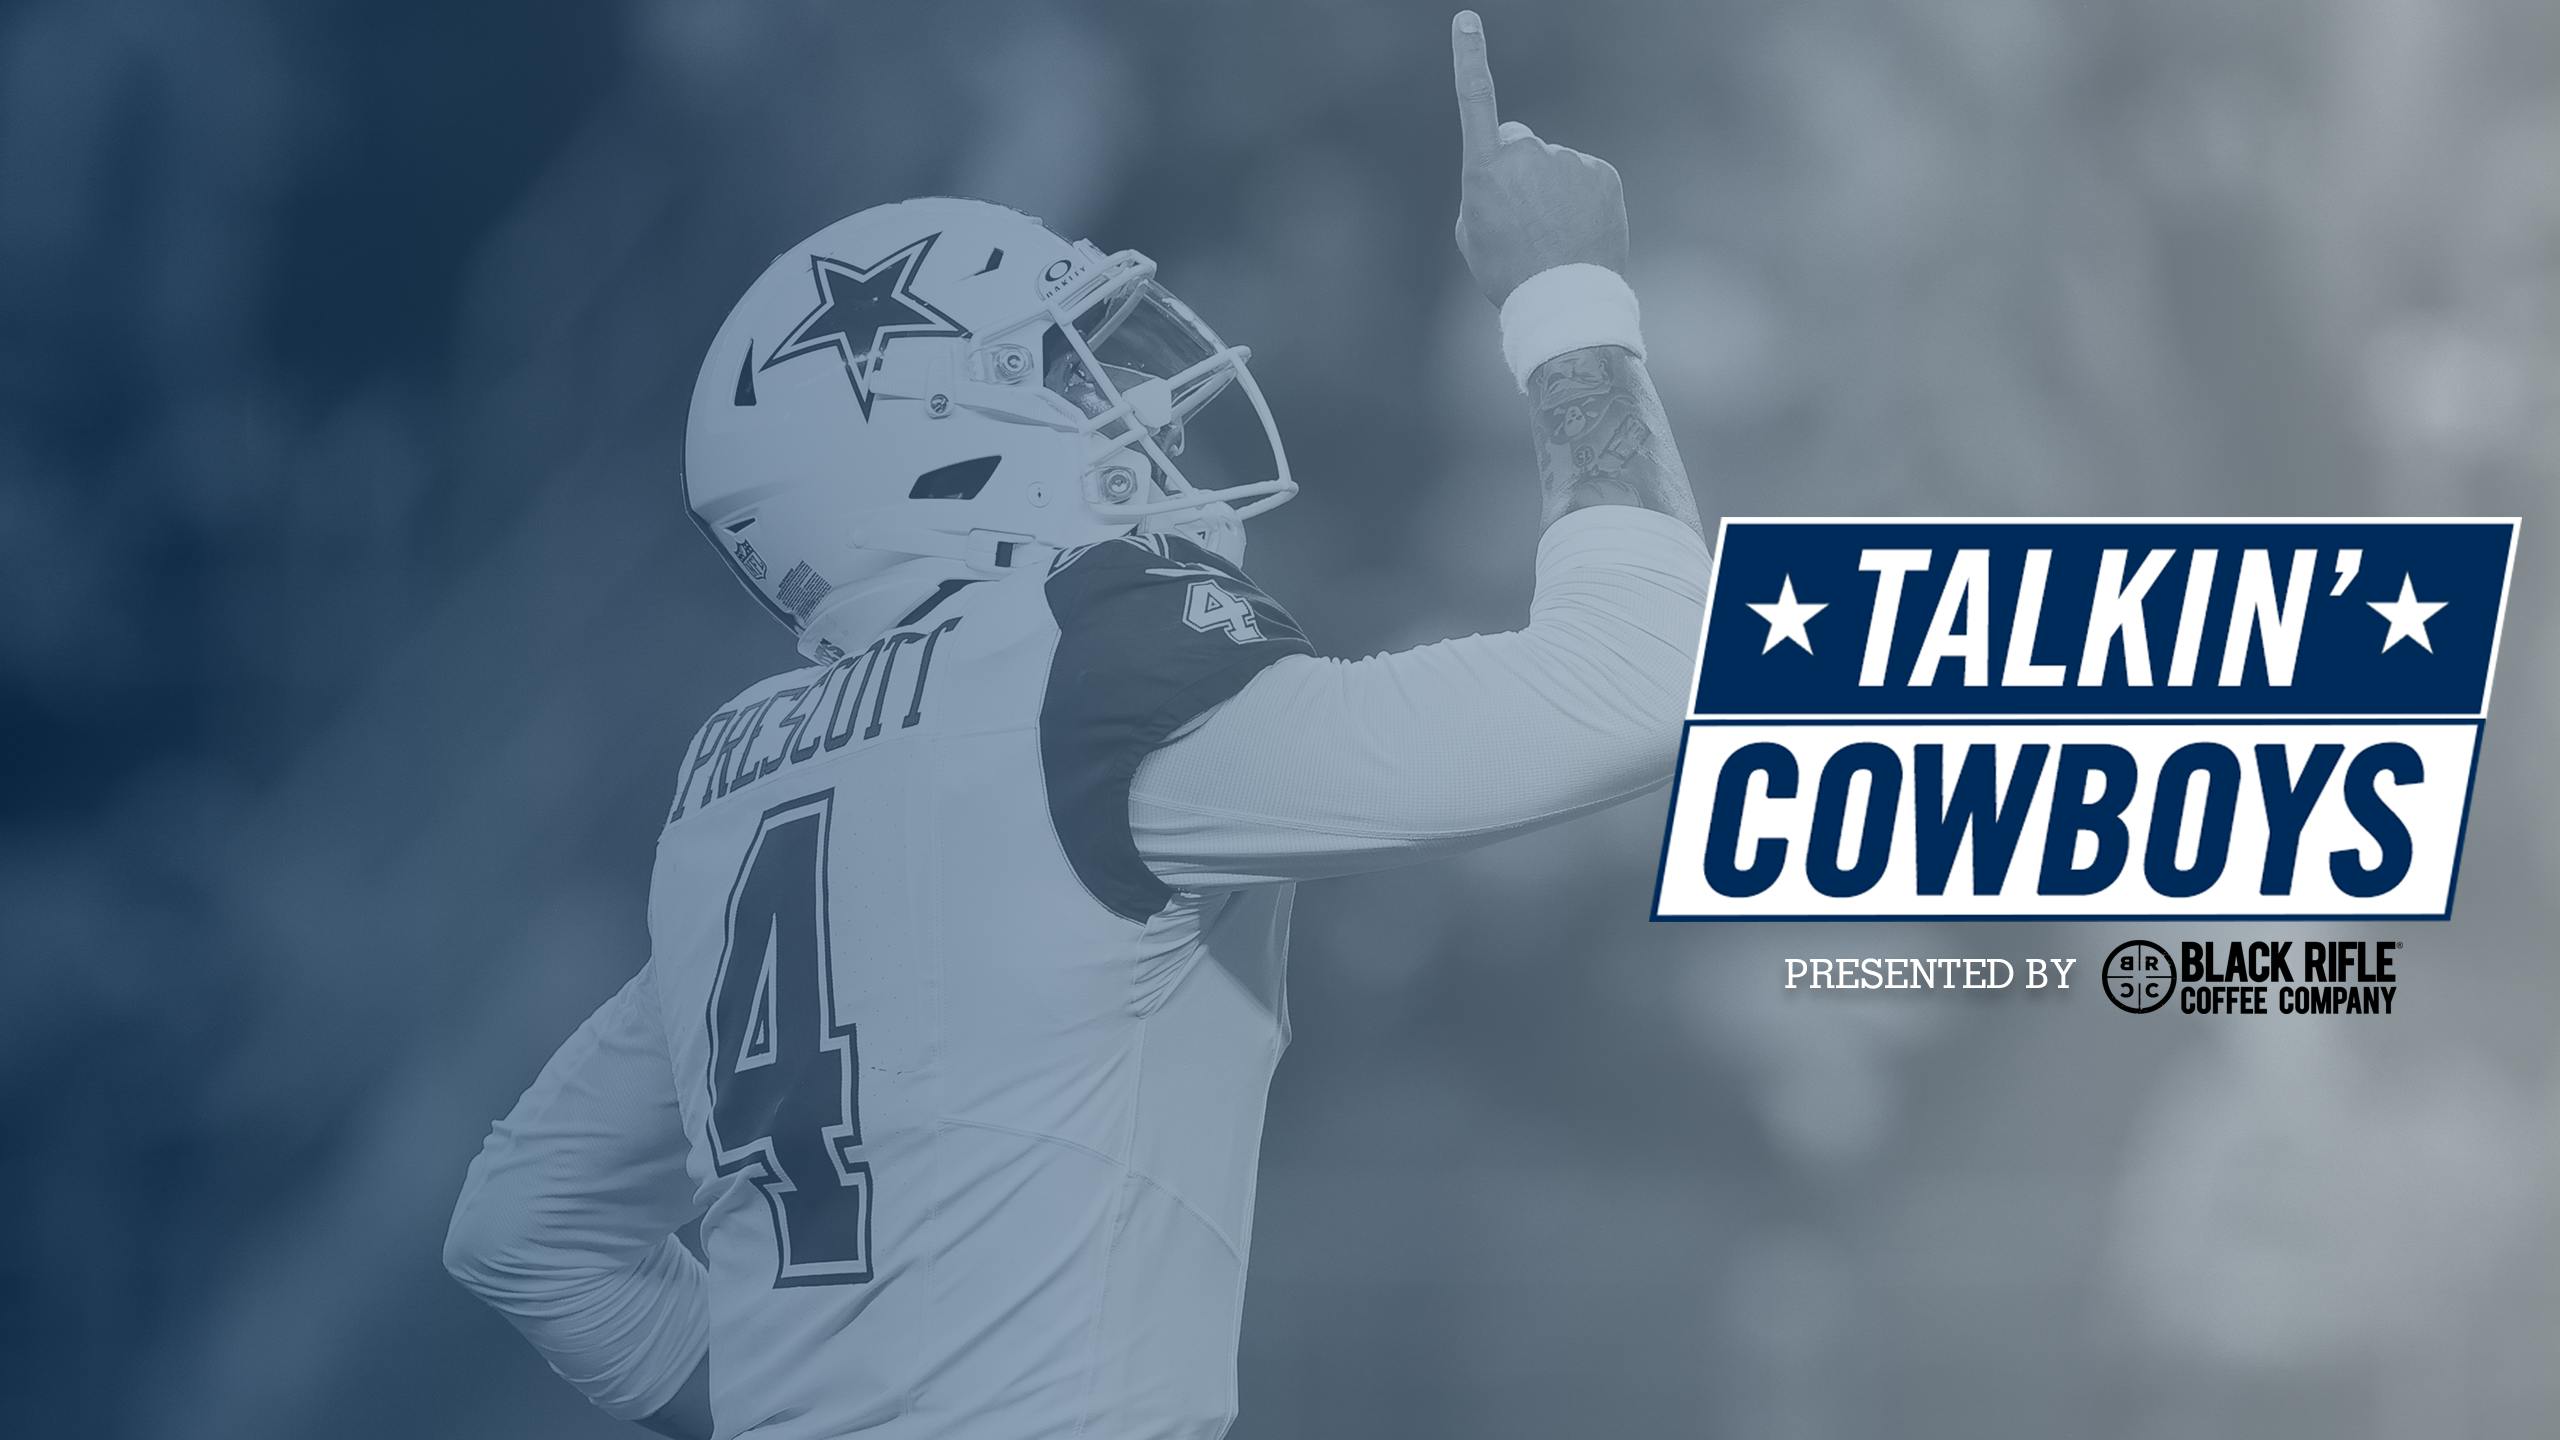 Talkin' Cowboys: All In the Family